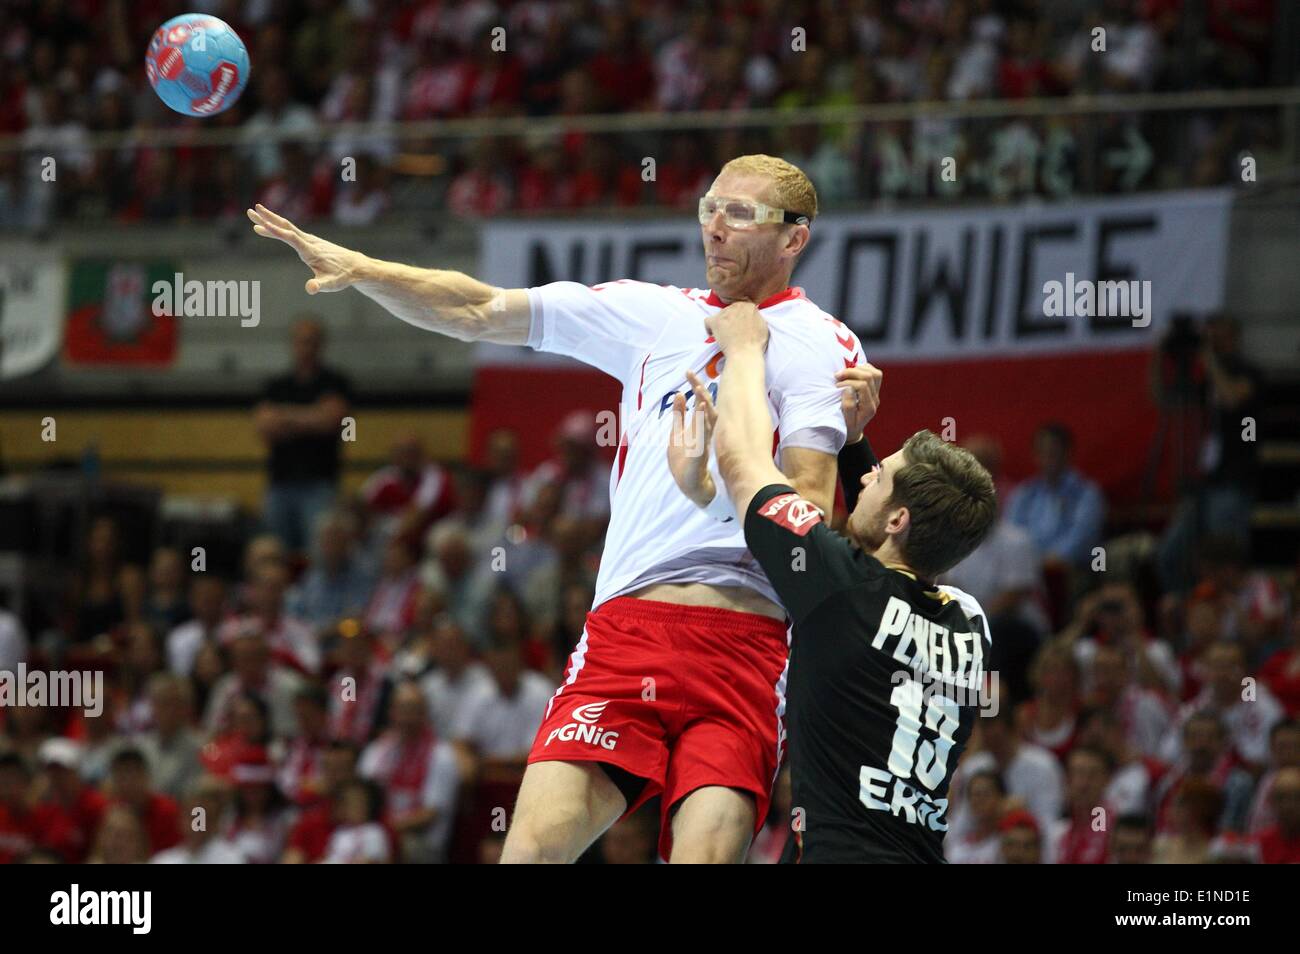 Gdansk, Poland 7th, June 2014 Quatar 2015 Men's World Handball Championship Play Off game between Poland and Germany at ERGO Arena sports hall. Bielecki Karol (8) in action during the game. Credit:  Michal Fludra/Alamy Live News Stock Photo